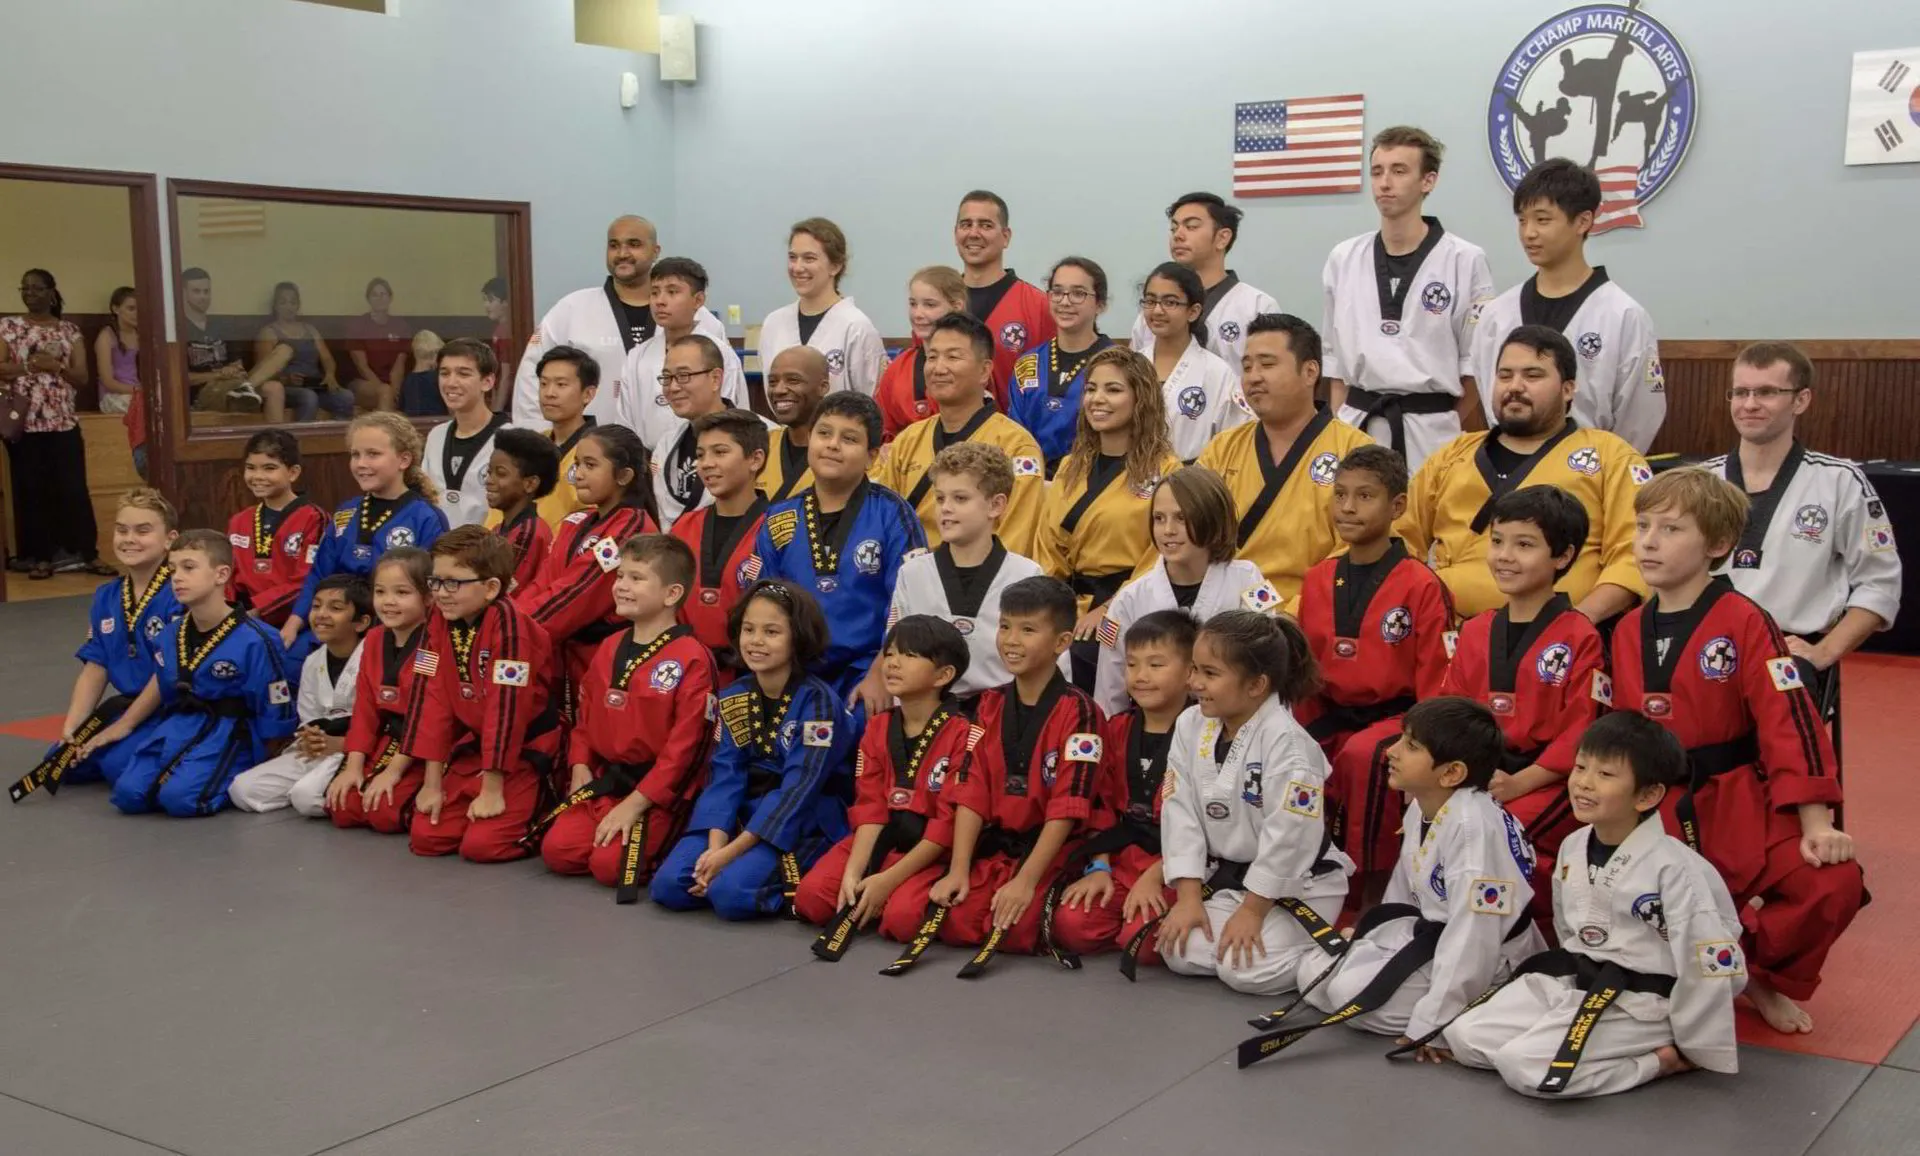 Students at Life Champ Martial Arts school in Kingstowne/Hayfield, VA